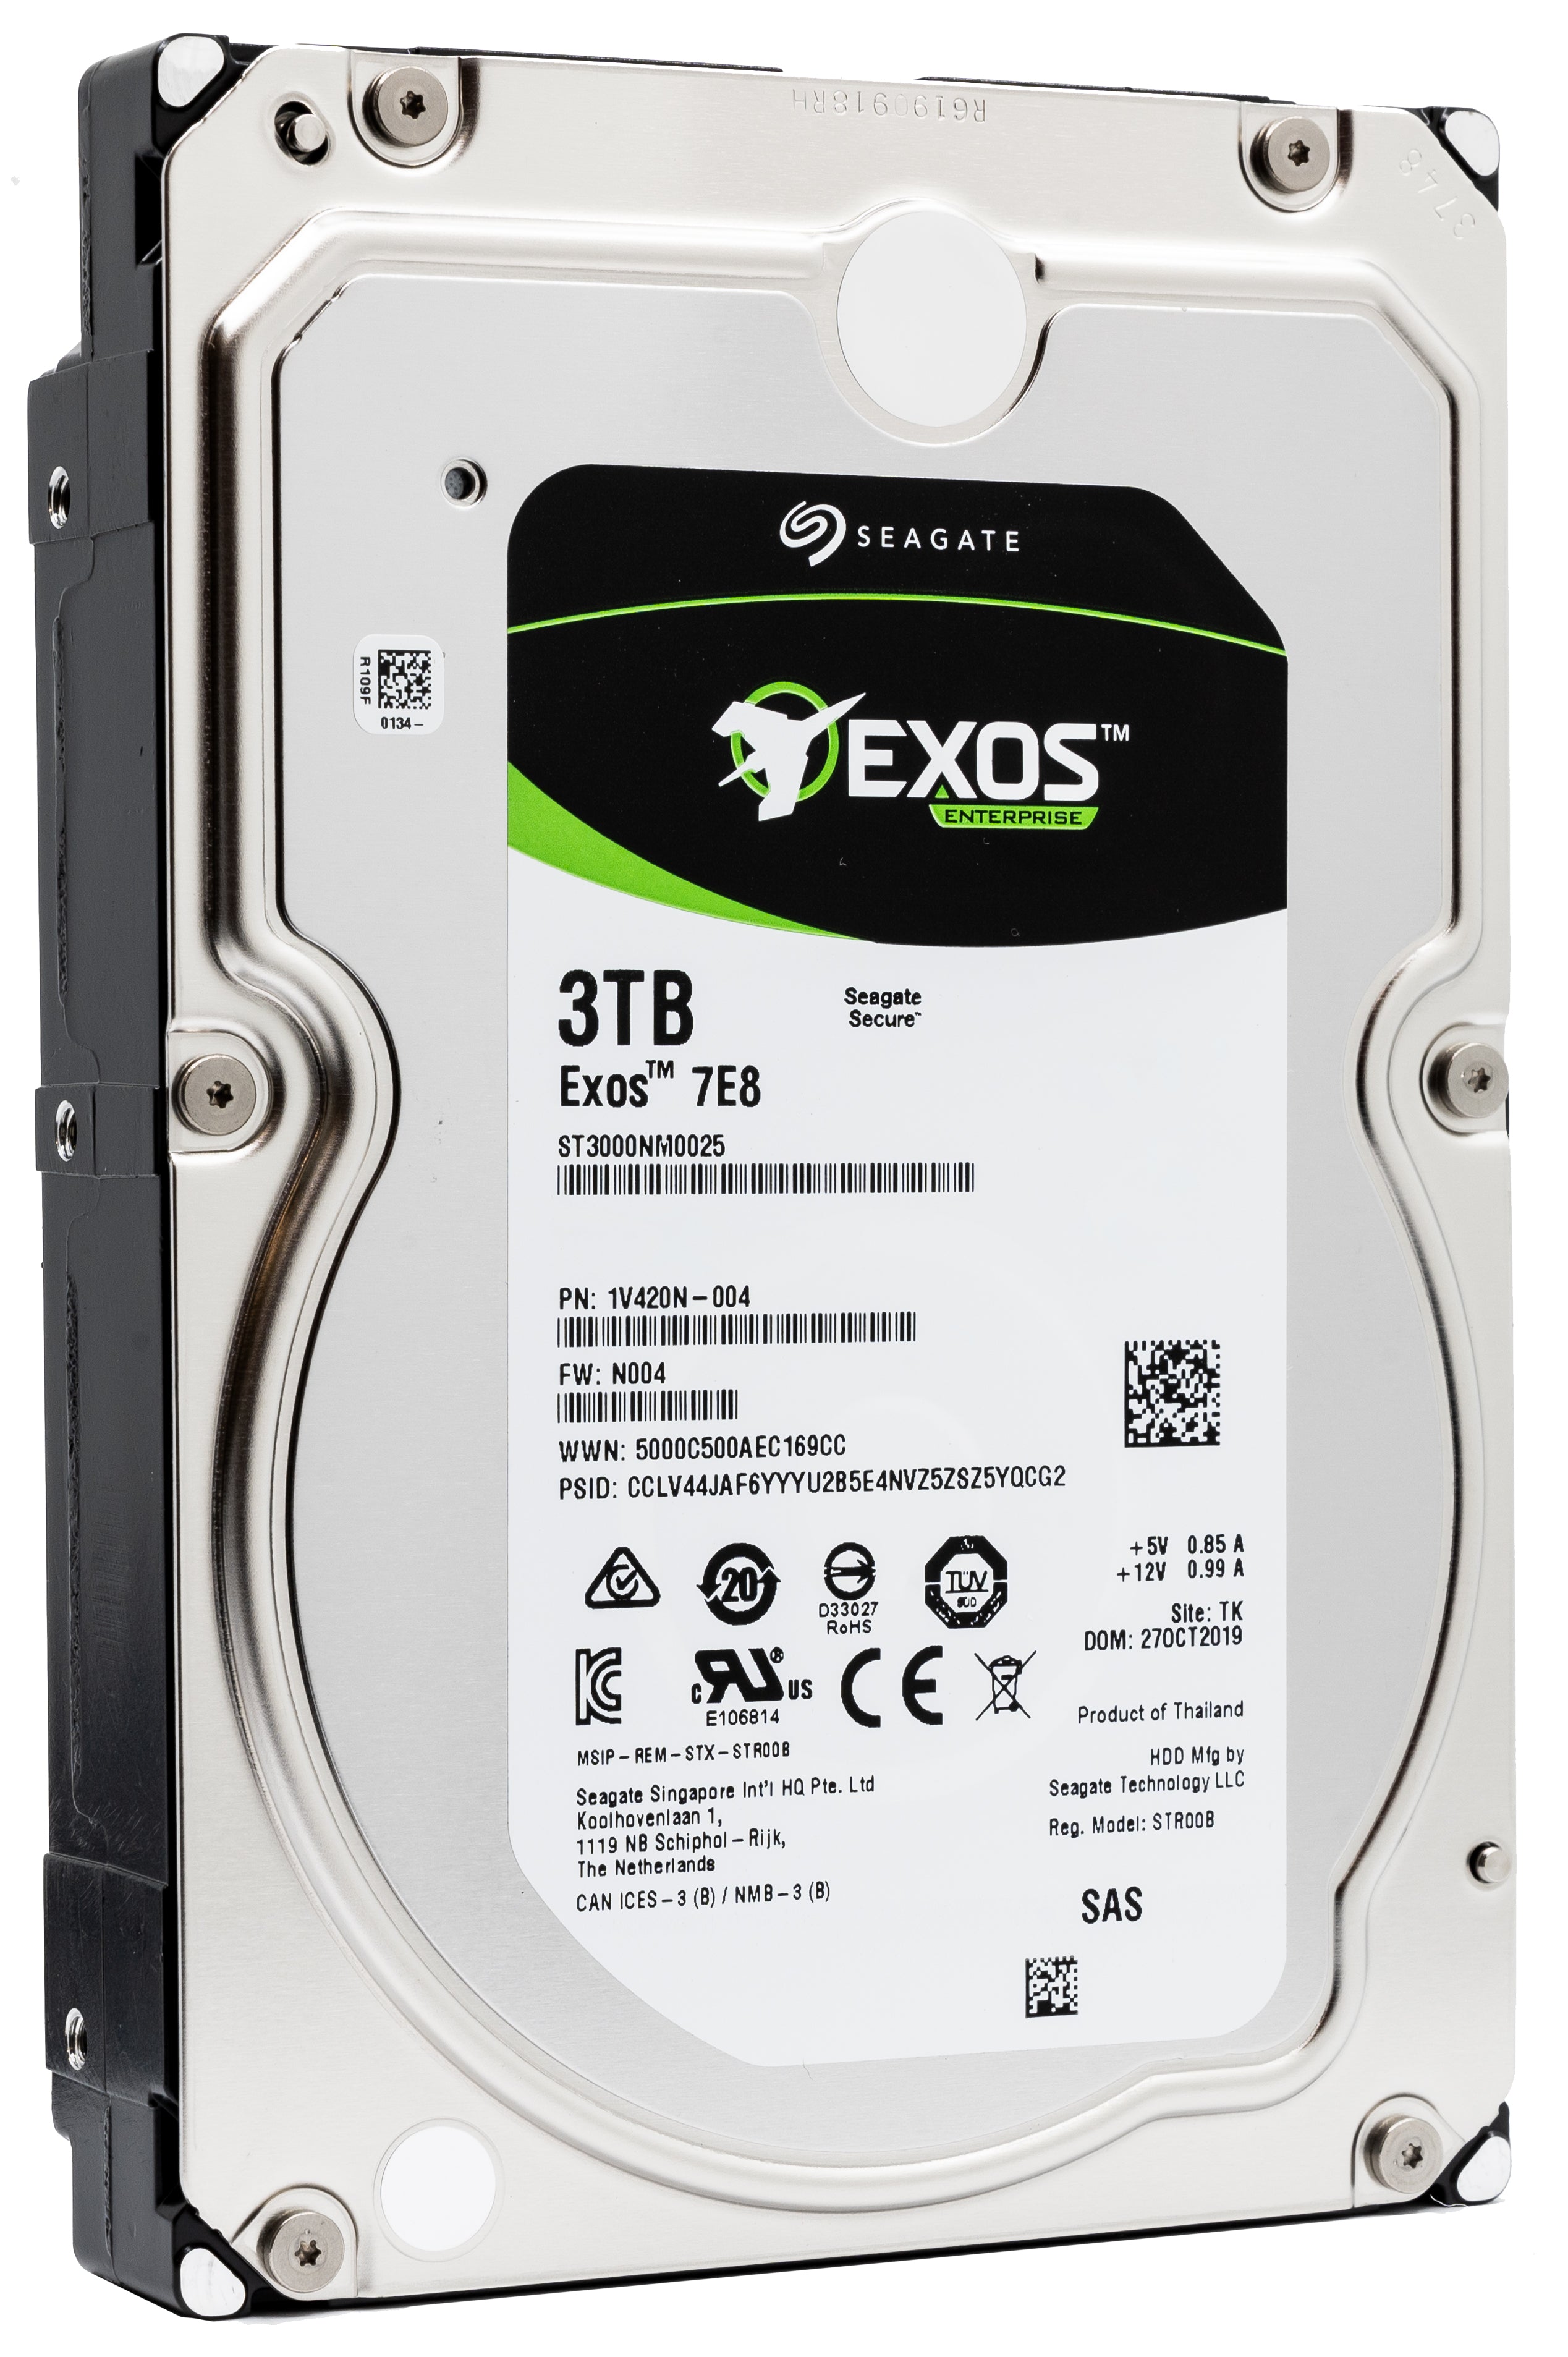 Seagate Exos 7E8 ST3000NM0025 3TB 7.2K RPM SAS 12Gb/s 512n 128MB 3.5" Hard Drive - Product Image